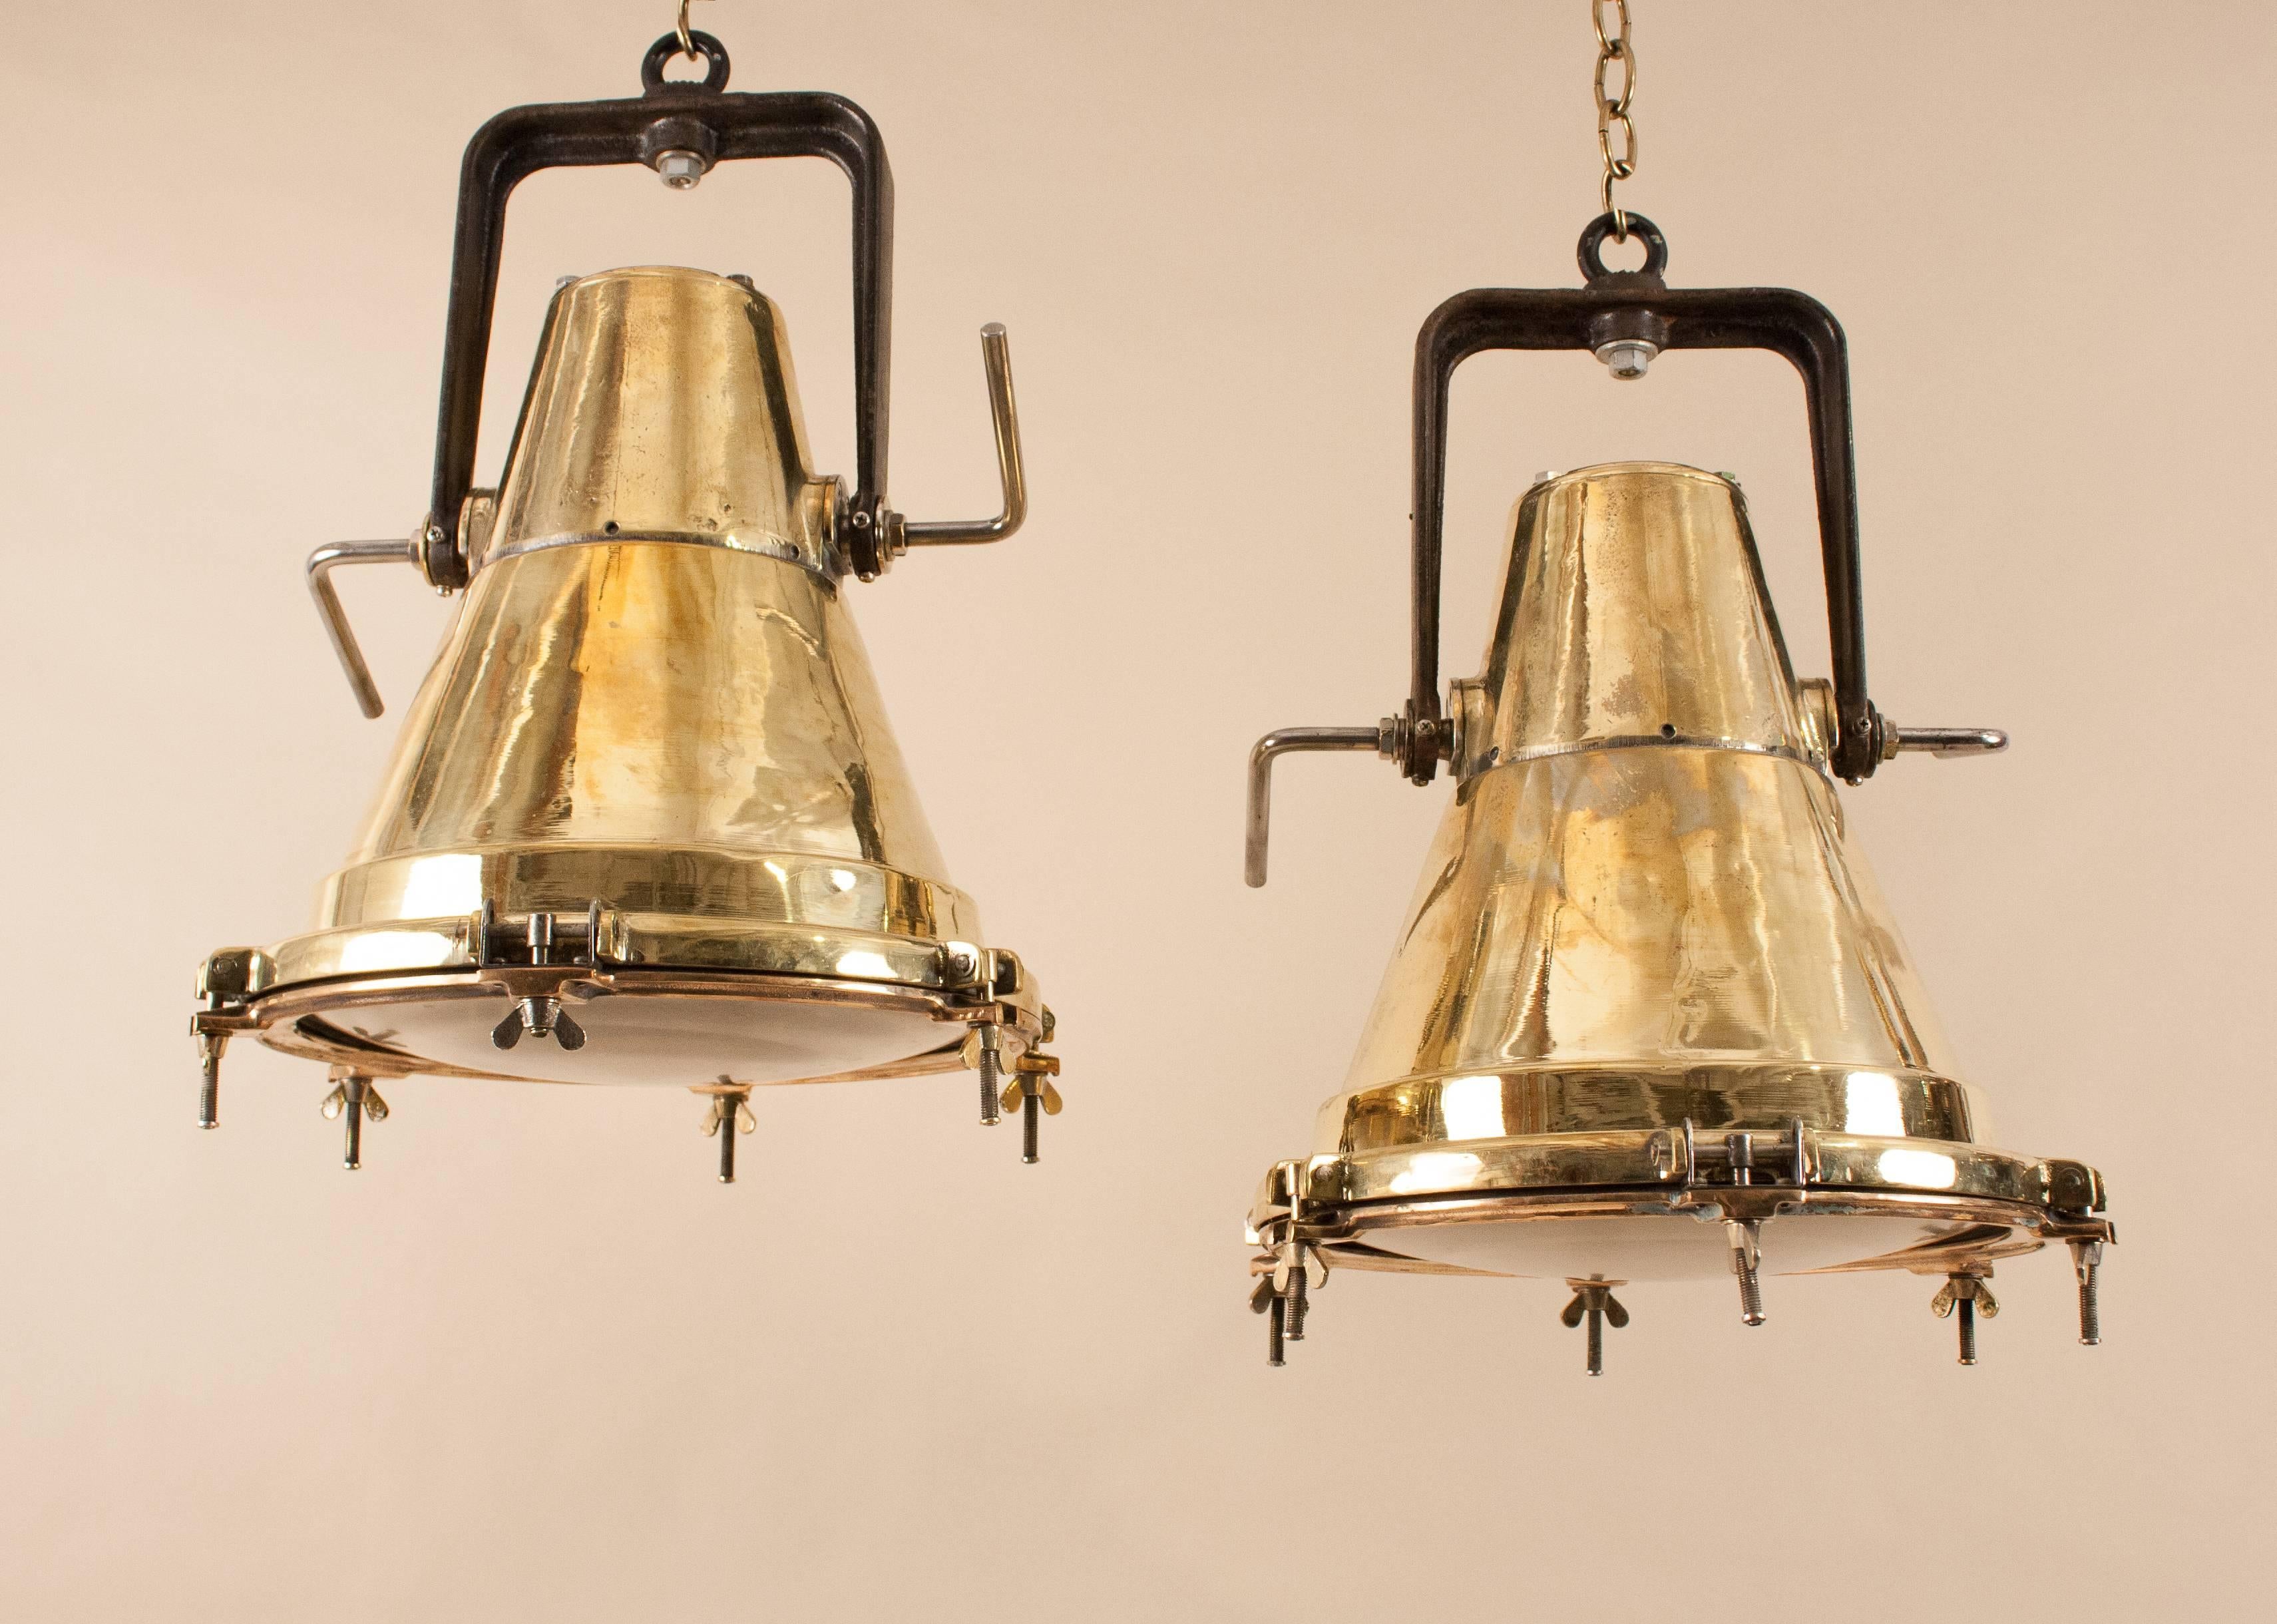 An authentic and uncommon pair of 1950s polished brass ship deck lights with wonderful size, shape and patina. Salvaged from a marine vessel and attentively restored, these nautical pendants suspend from adjustable black iron brackets and have